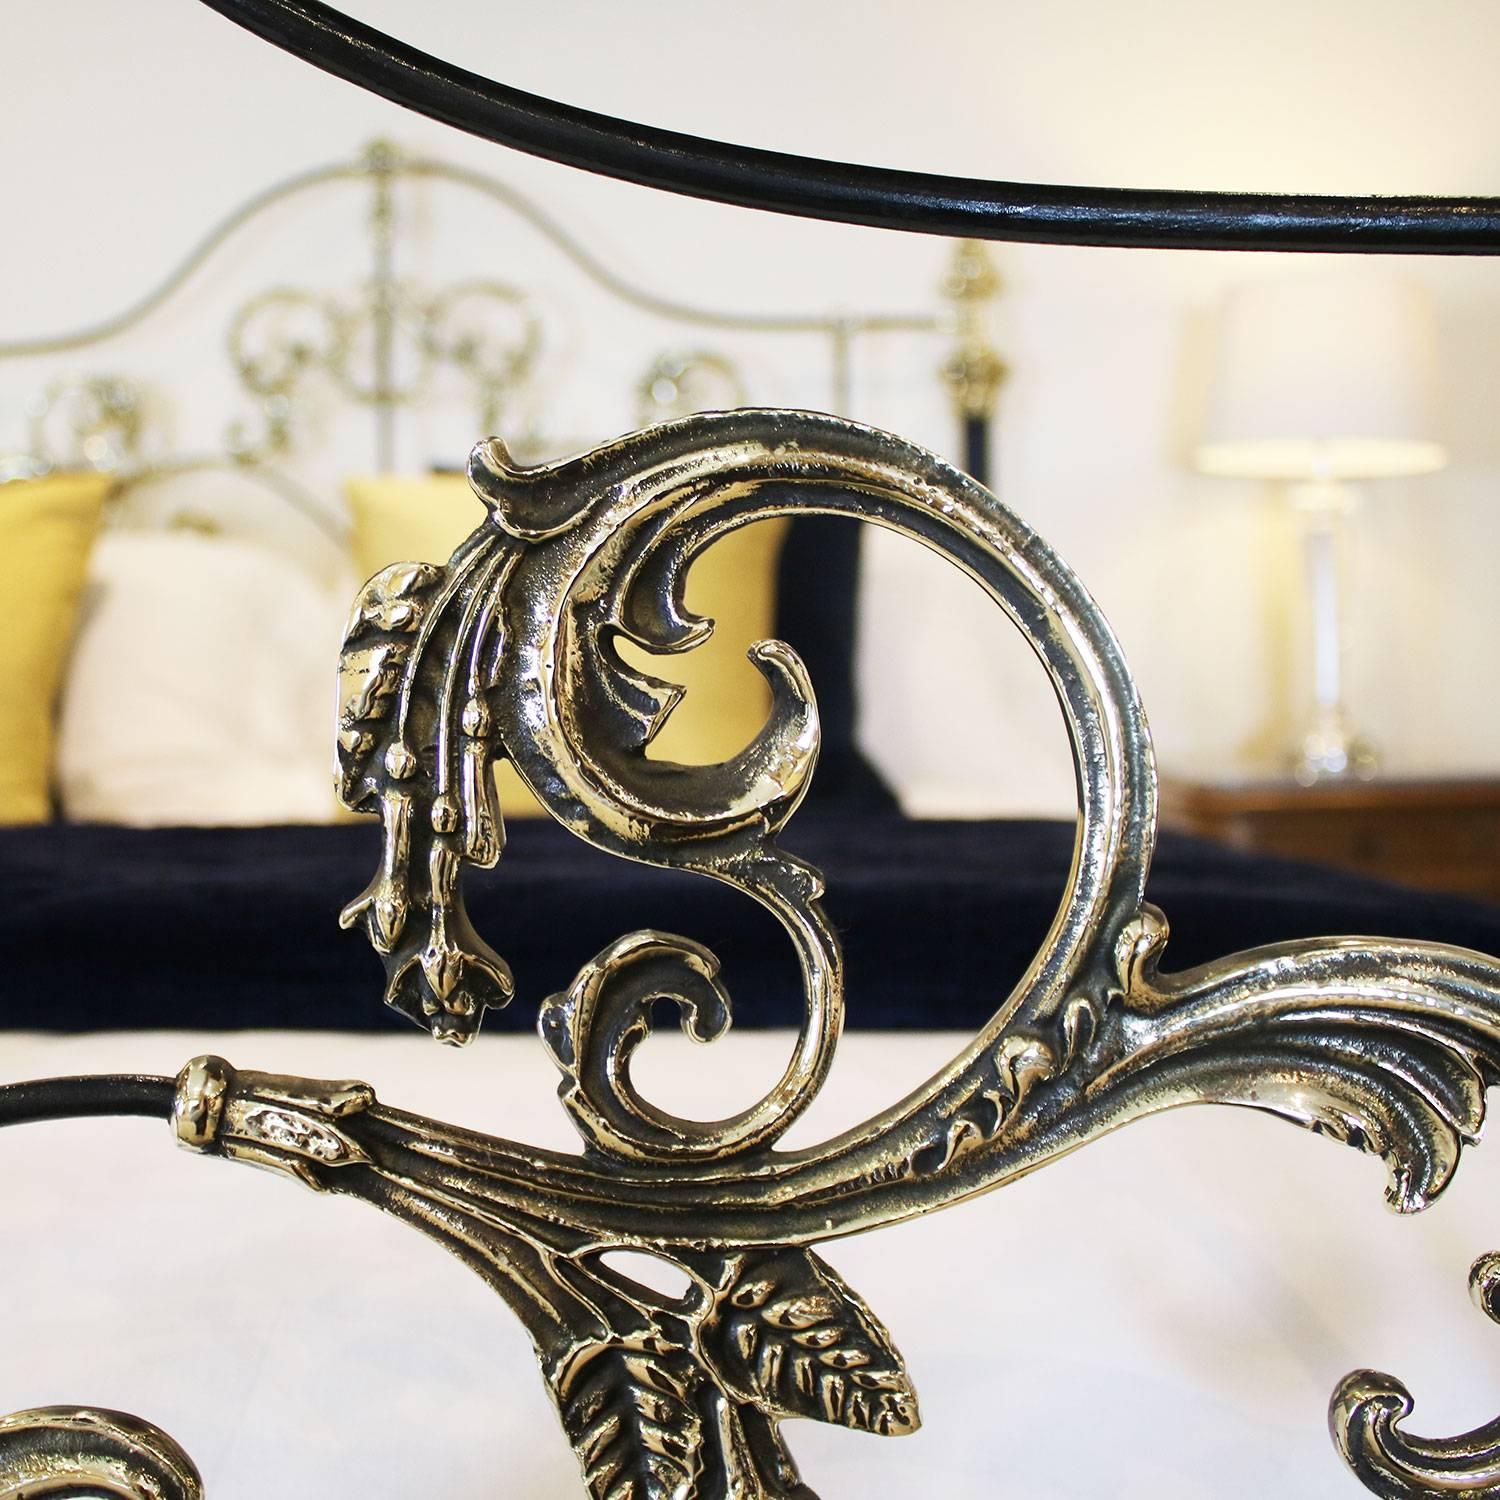 British Bespoke Brass and Iron Tangier Bed For Sale